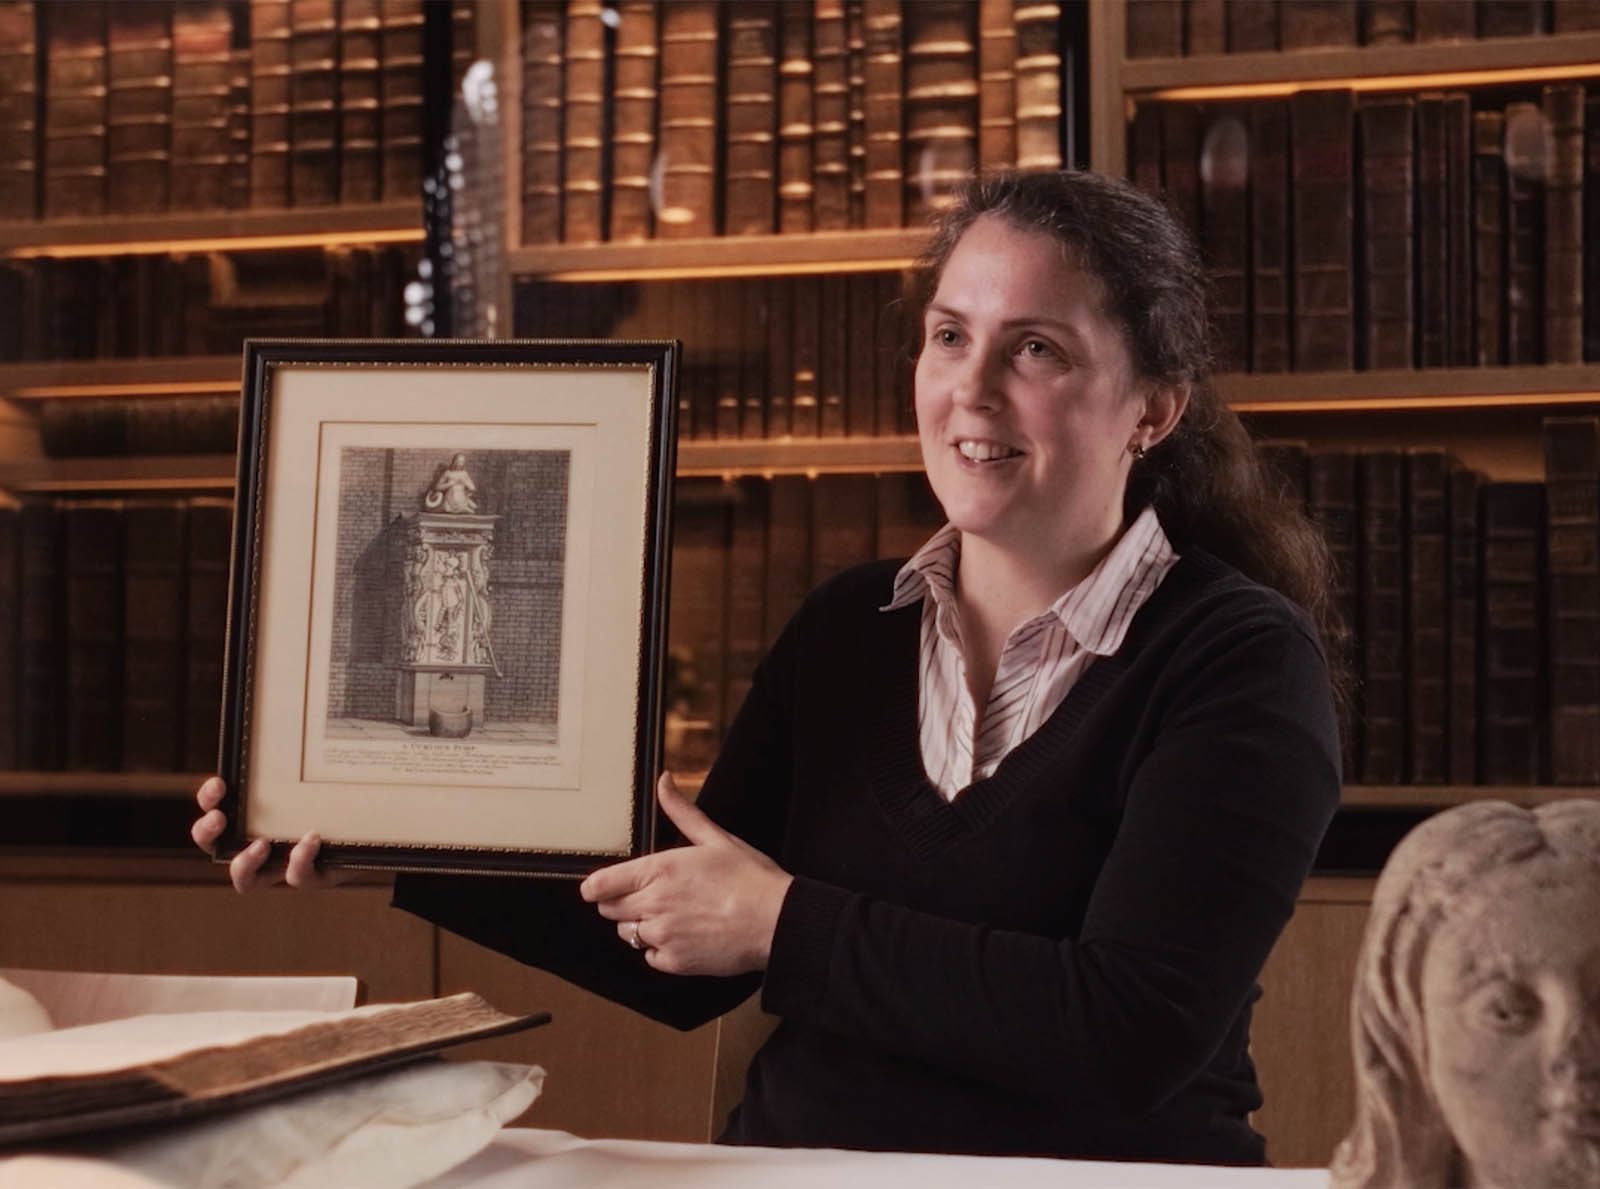 woman holding a framed print in a library